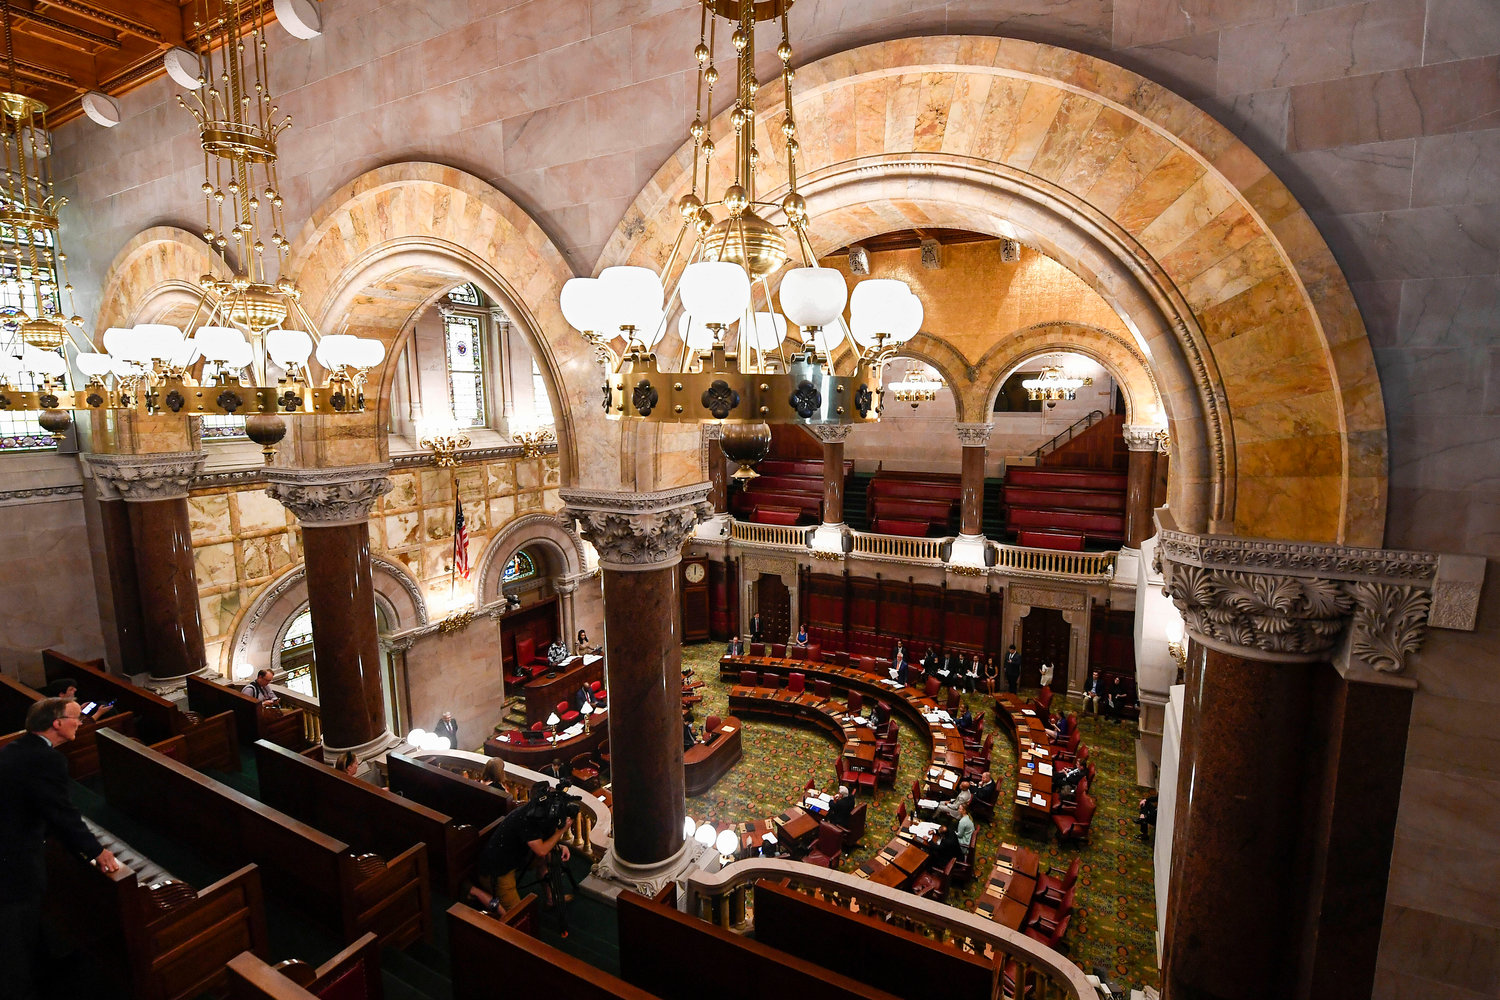 FILE — Members of the New York Senate, debate legislation to consider new firearms regulations for concealed-carry permits, during a special legislative session in the Senate Chamber at the state Capitol, July 1, 2022, in Albany, N.Y. A federal lawsuit challenging part of New York's new gun law was filed Monday, July 11, 2022, by Republican congressional candidate Carl Paladino, one of multiple legal challenges expected against state handgun licensing rules approved after a recent Supreme Court ruling.